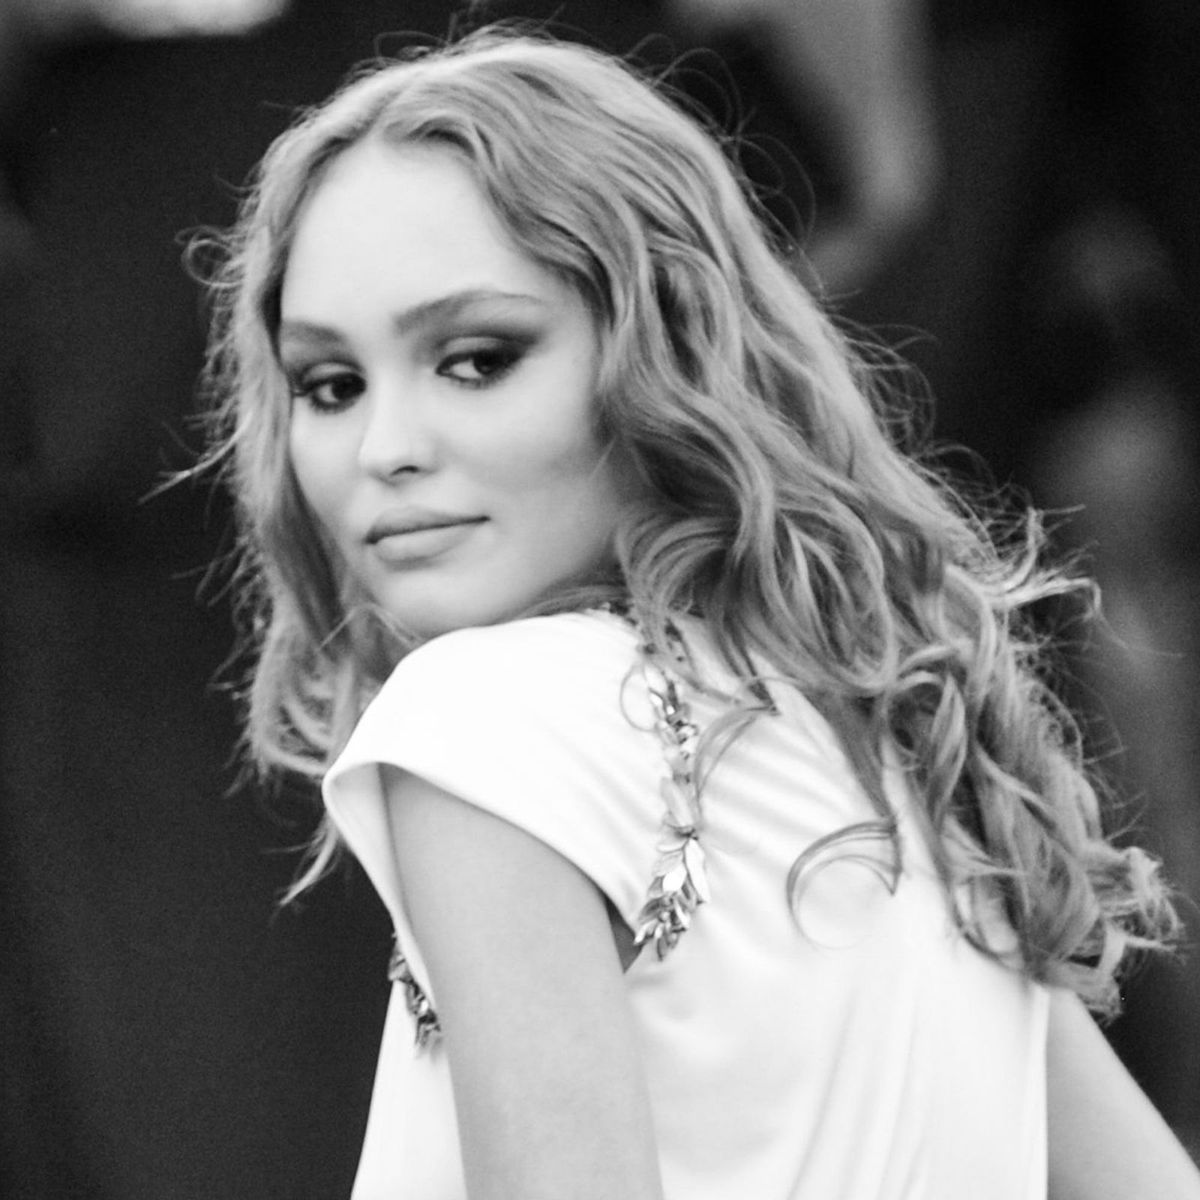 The exact products Lily-Rose Depp wore at the Cannes opening ceremony